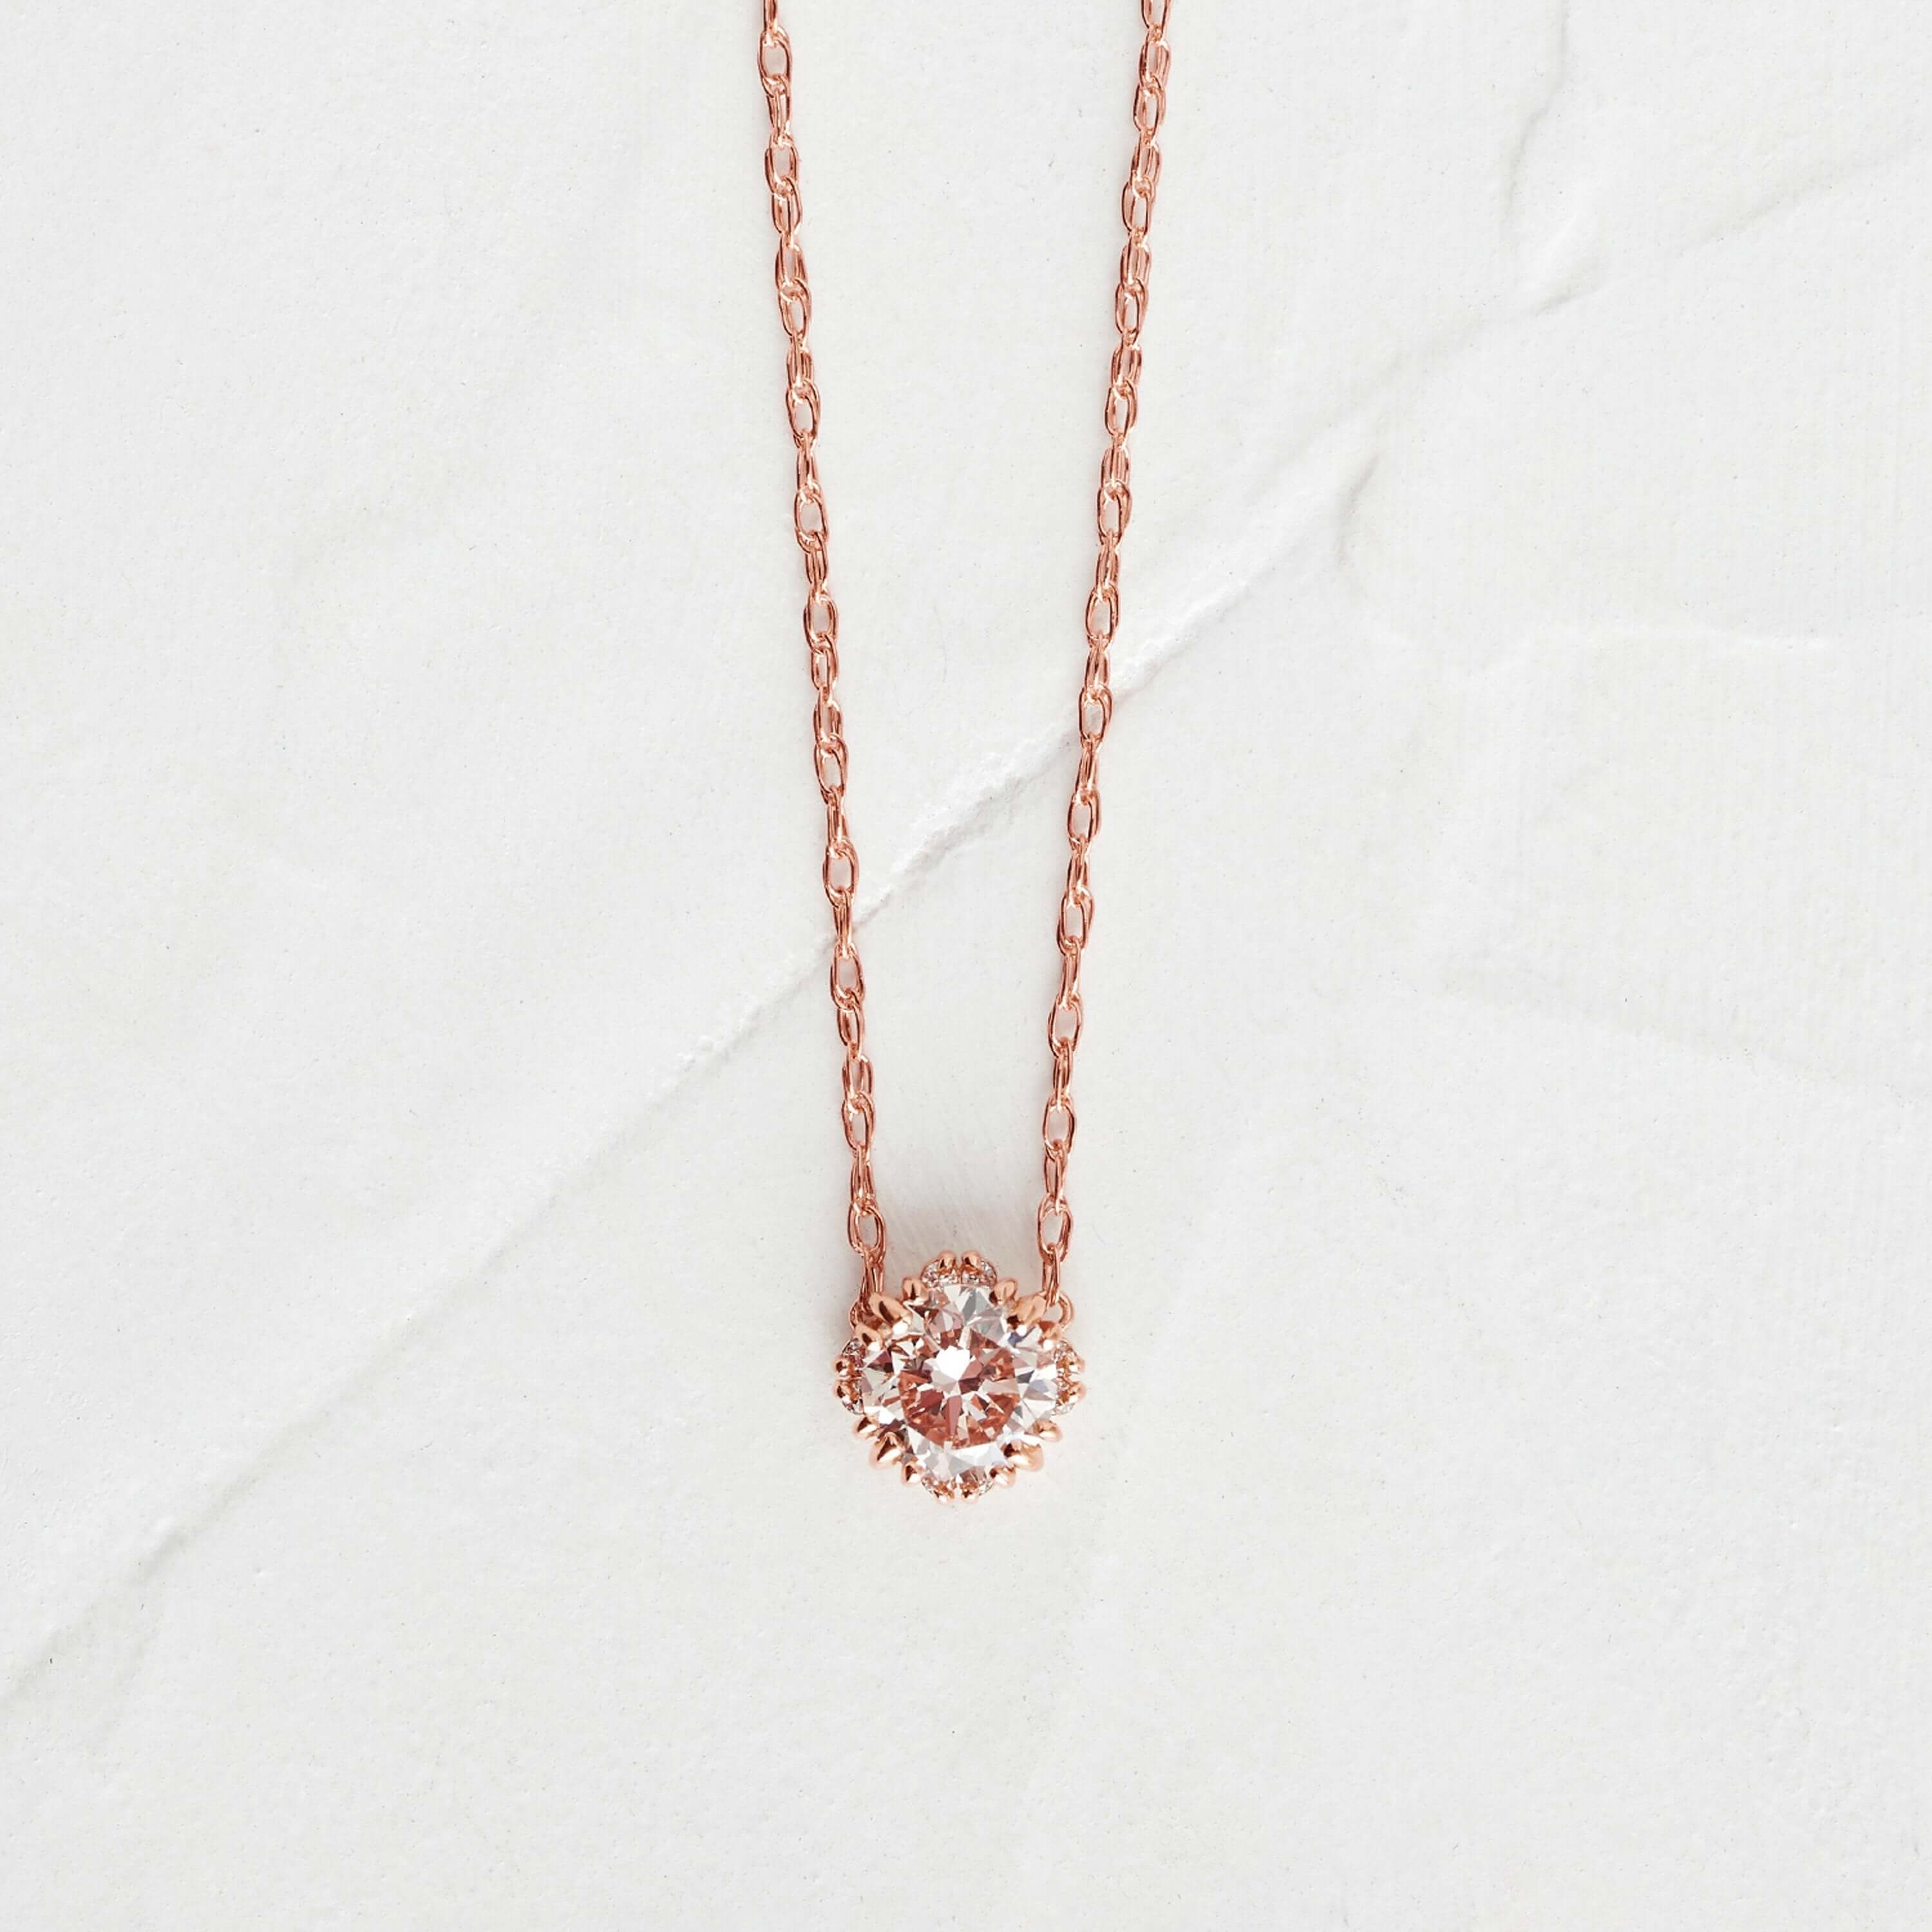 Threaded Necklace with Halo | Melanie Casey